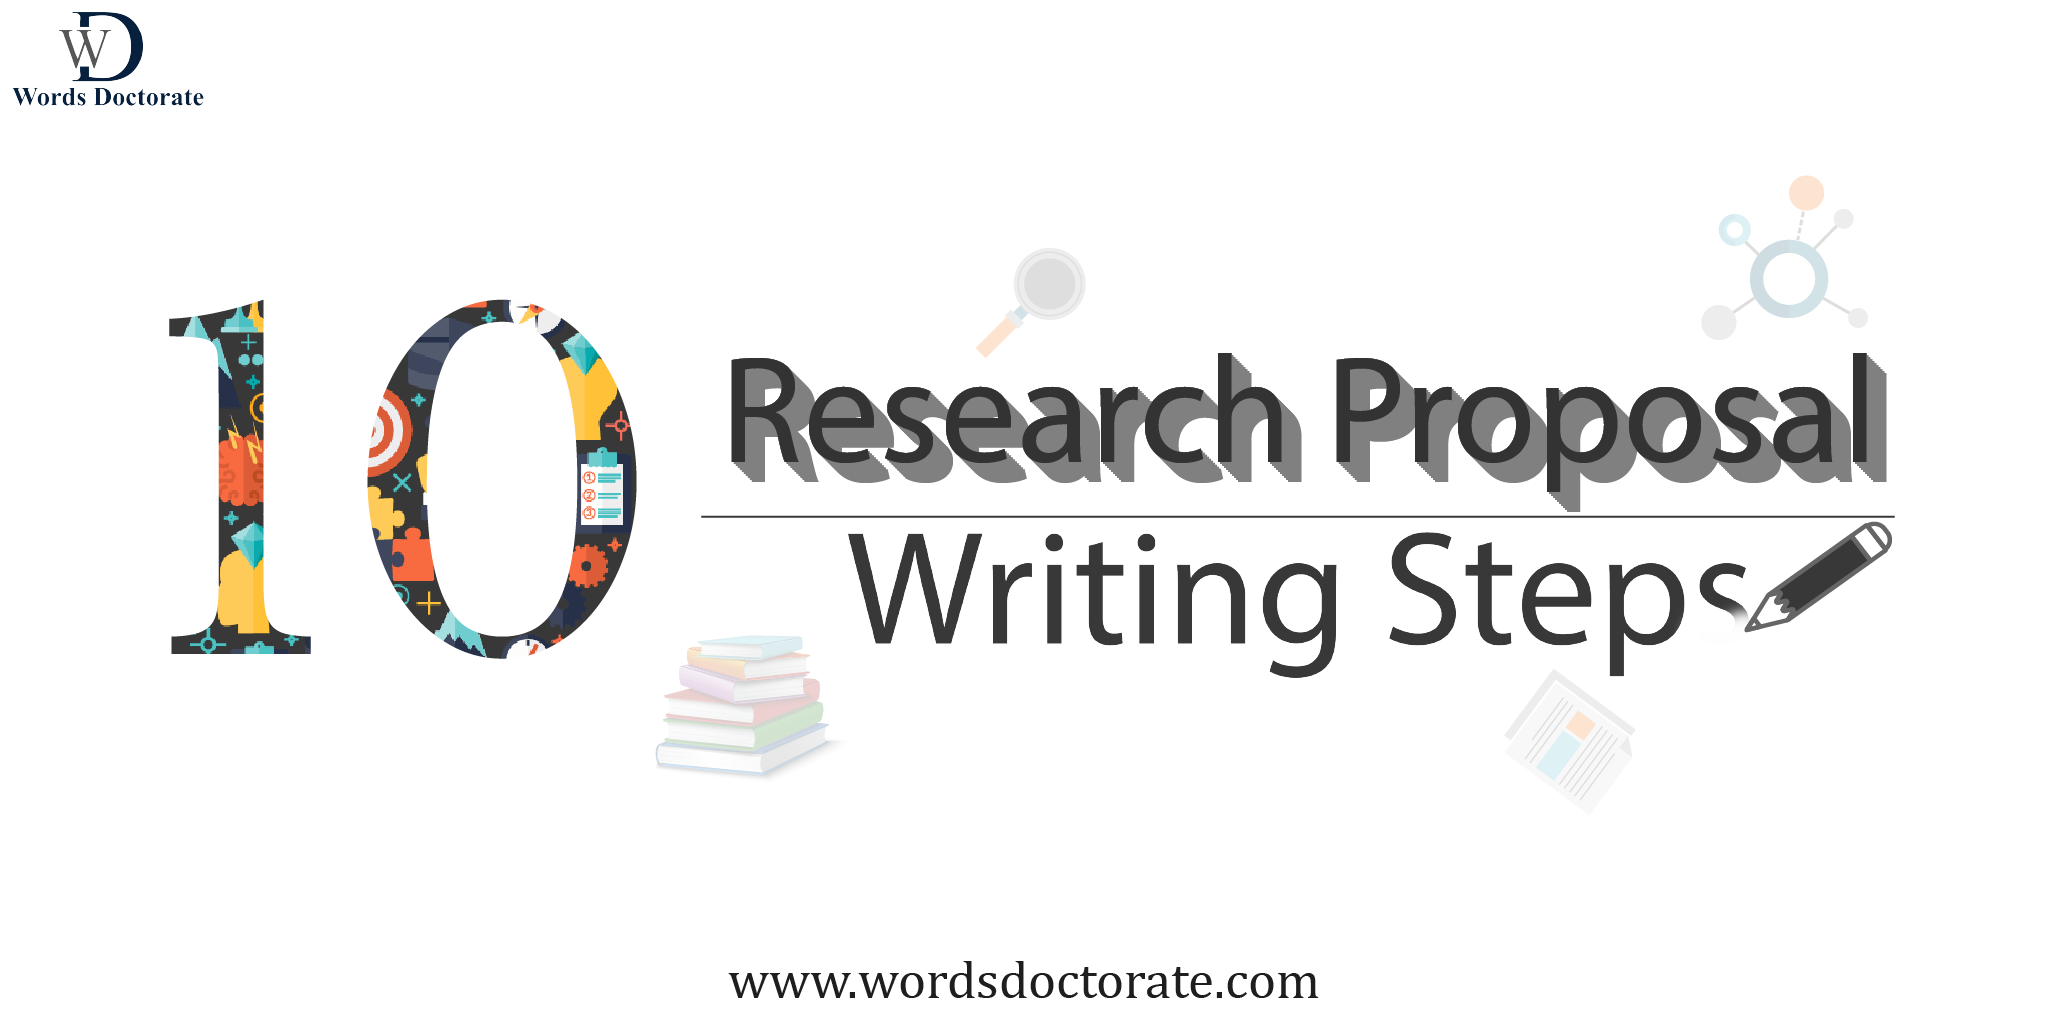 research proposal outline example